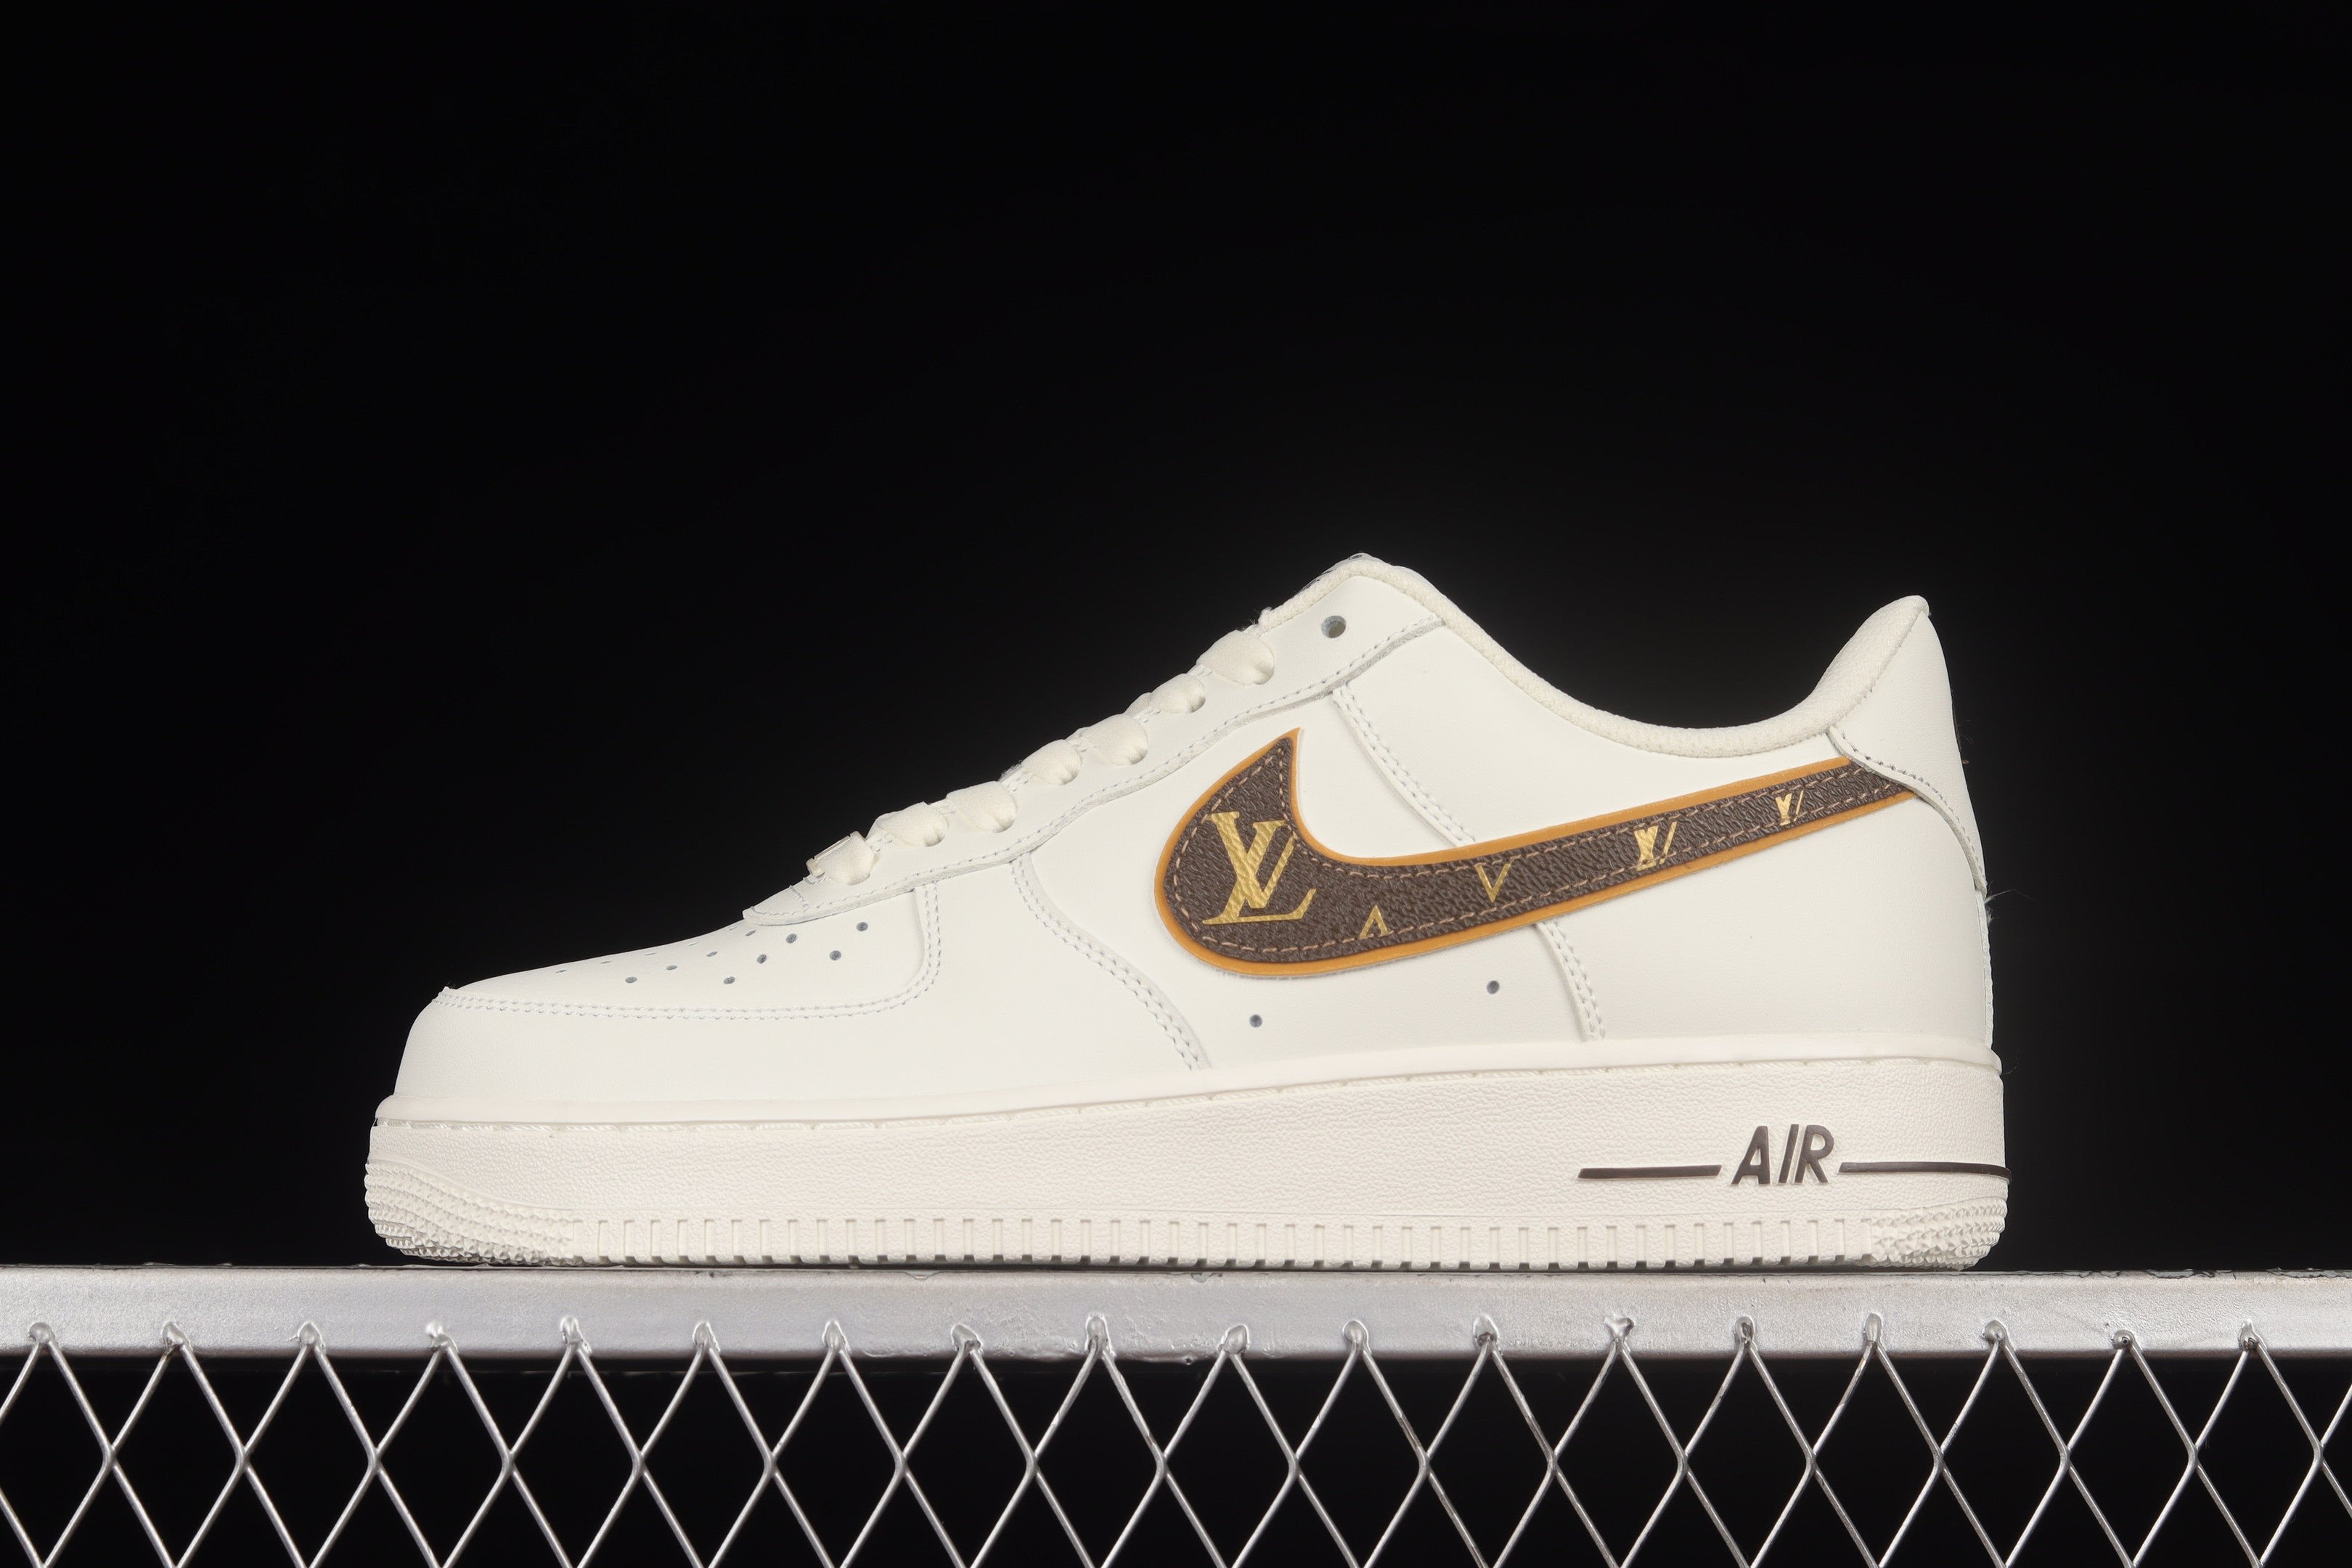 Nike - x Louis Vuitton Air Force 1 Low sneakers - unisex - Leather/Rubber/Fabric - 9 - White